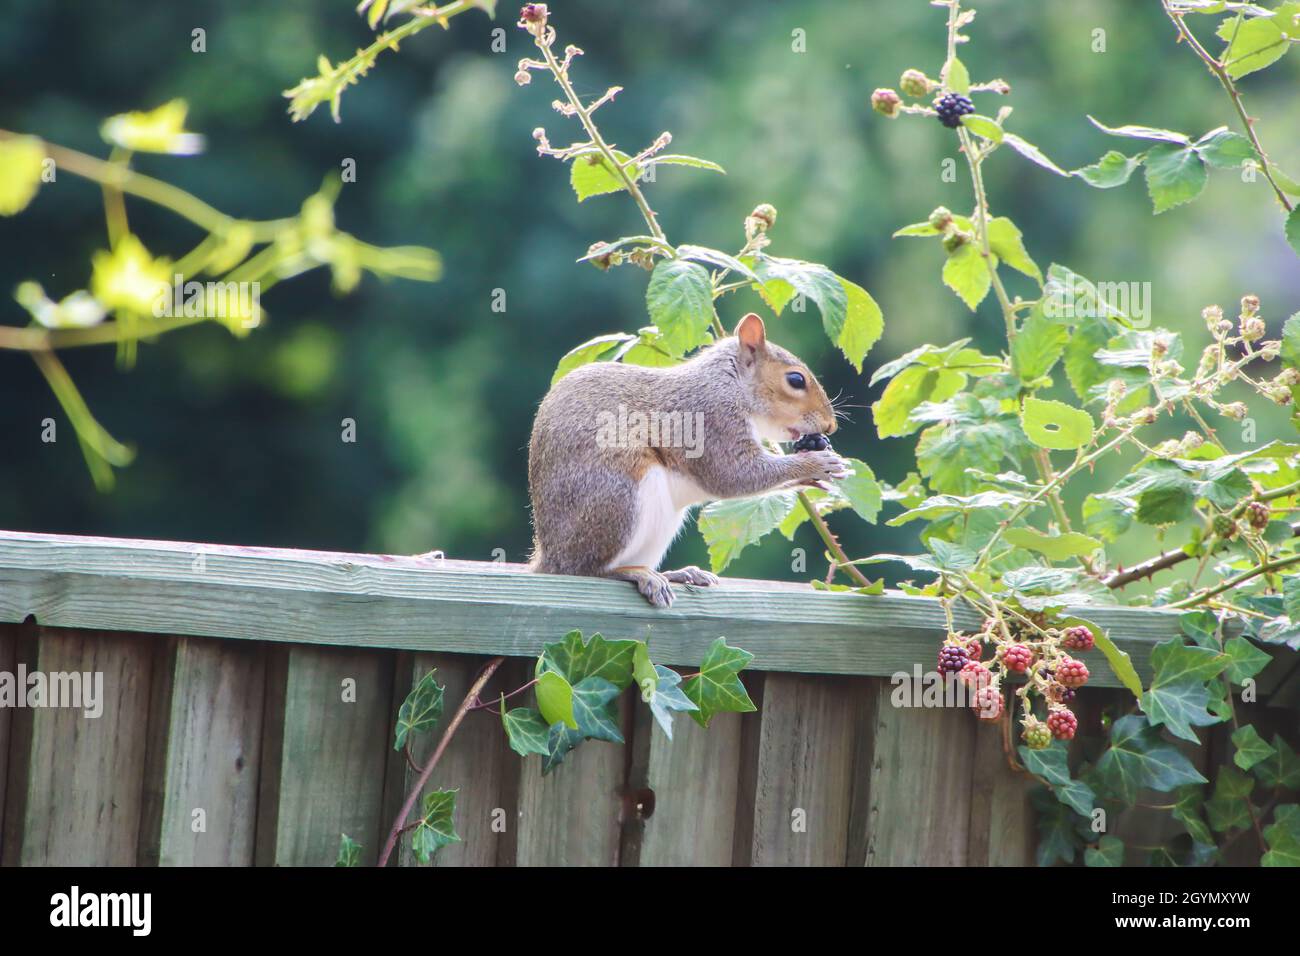 A grey squirrel perches on a garden fence eating a blackberry plucked from a nearby bramble. Stock Photo